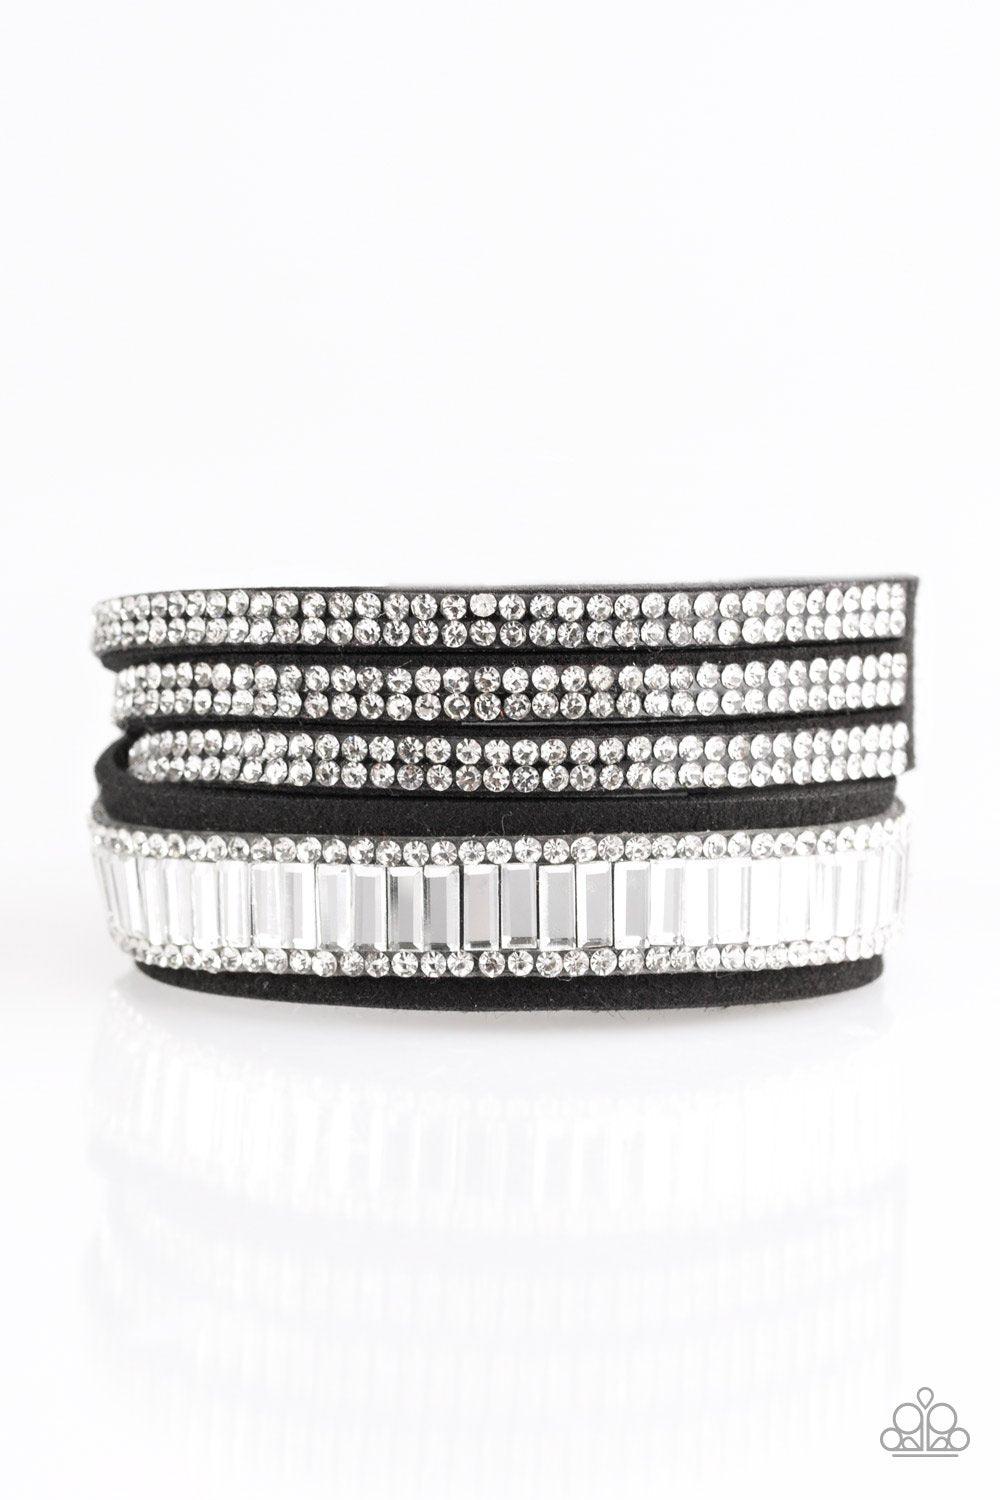 Just In Showtime Black and White Double-wrap Snap Bracelet - Paparazzi Accessories-CarasShop.com - $5 Jewelry by Cara Jewels